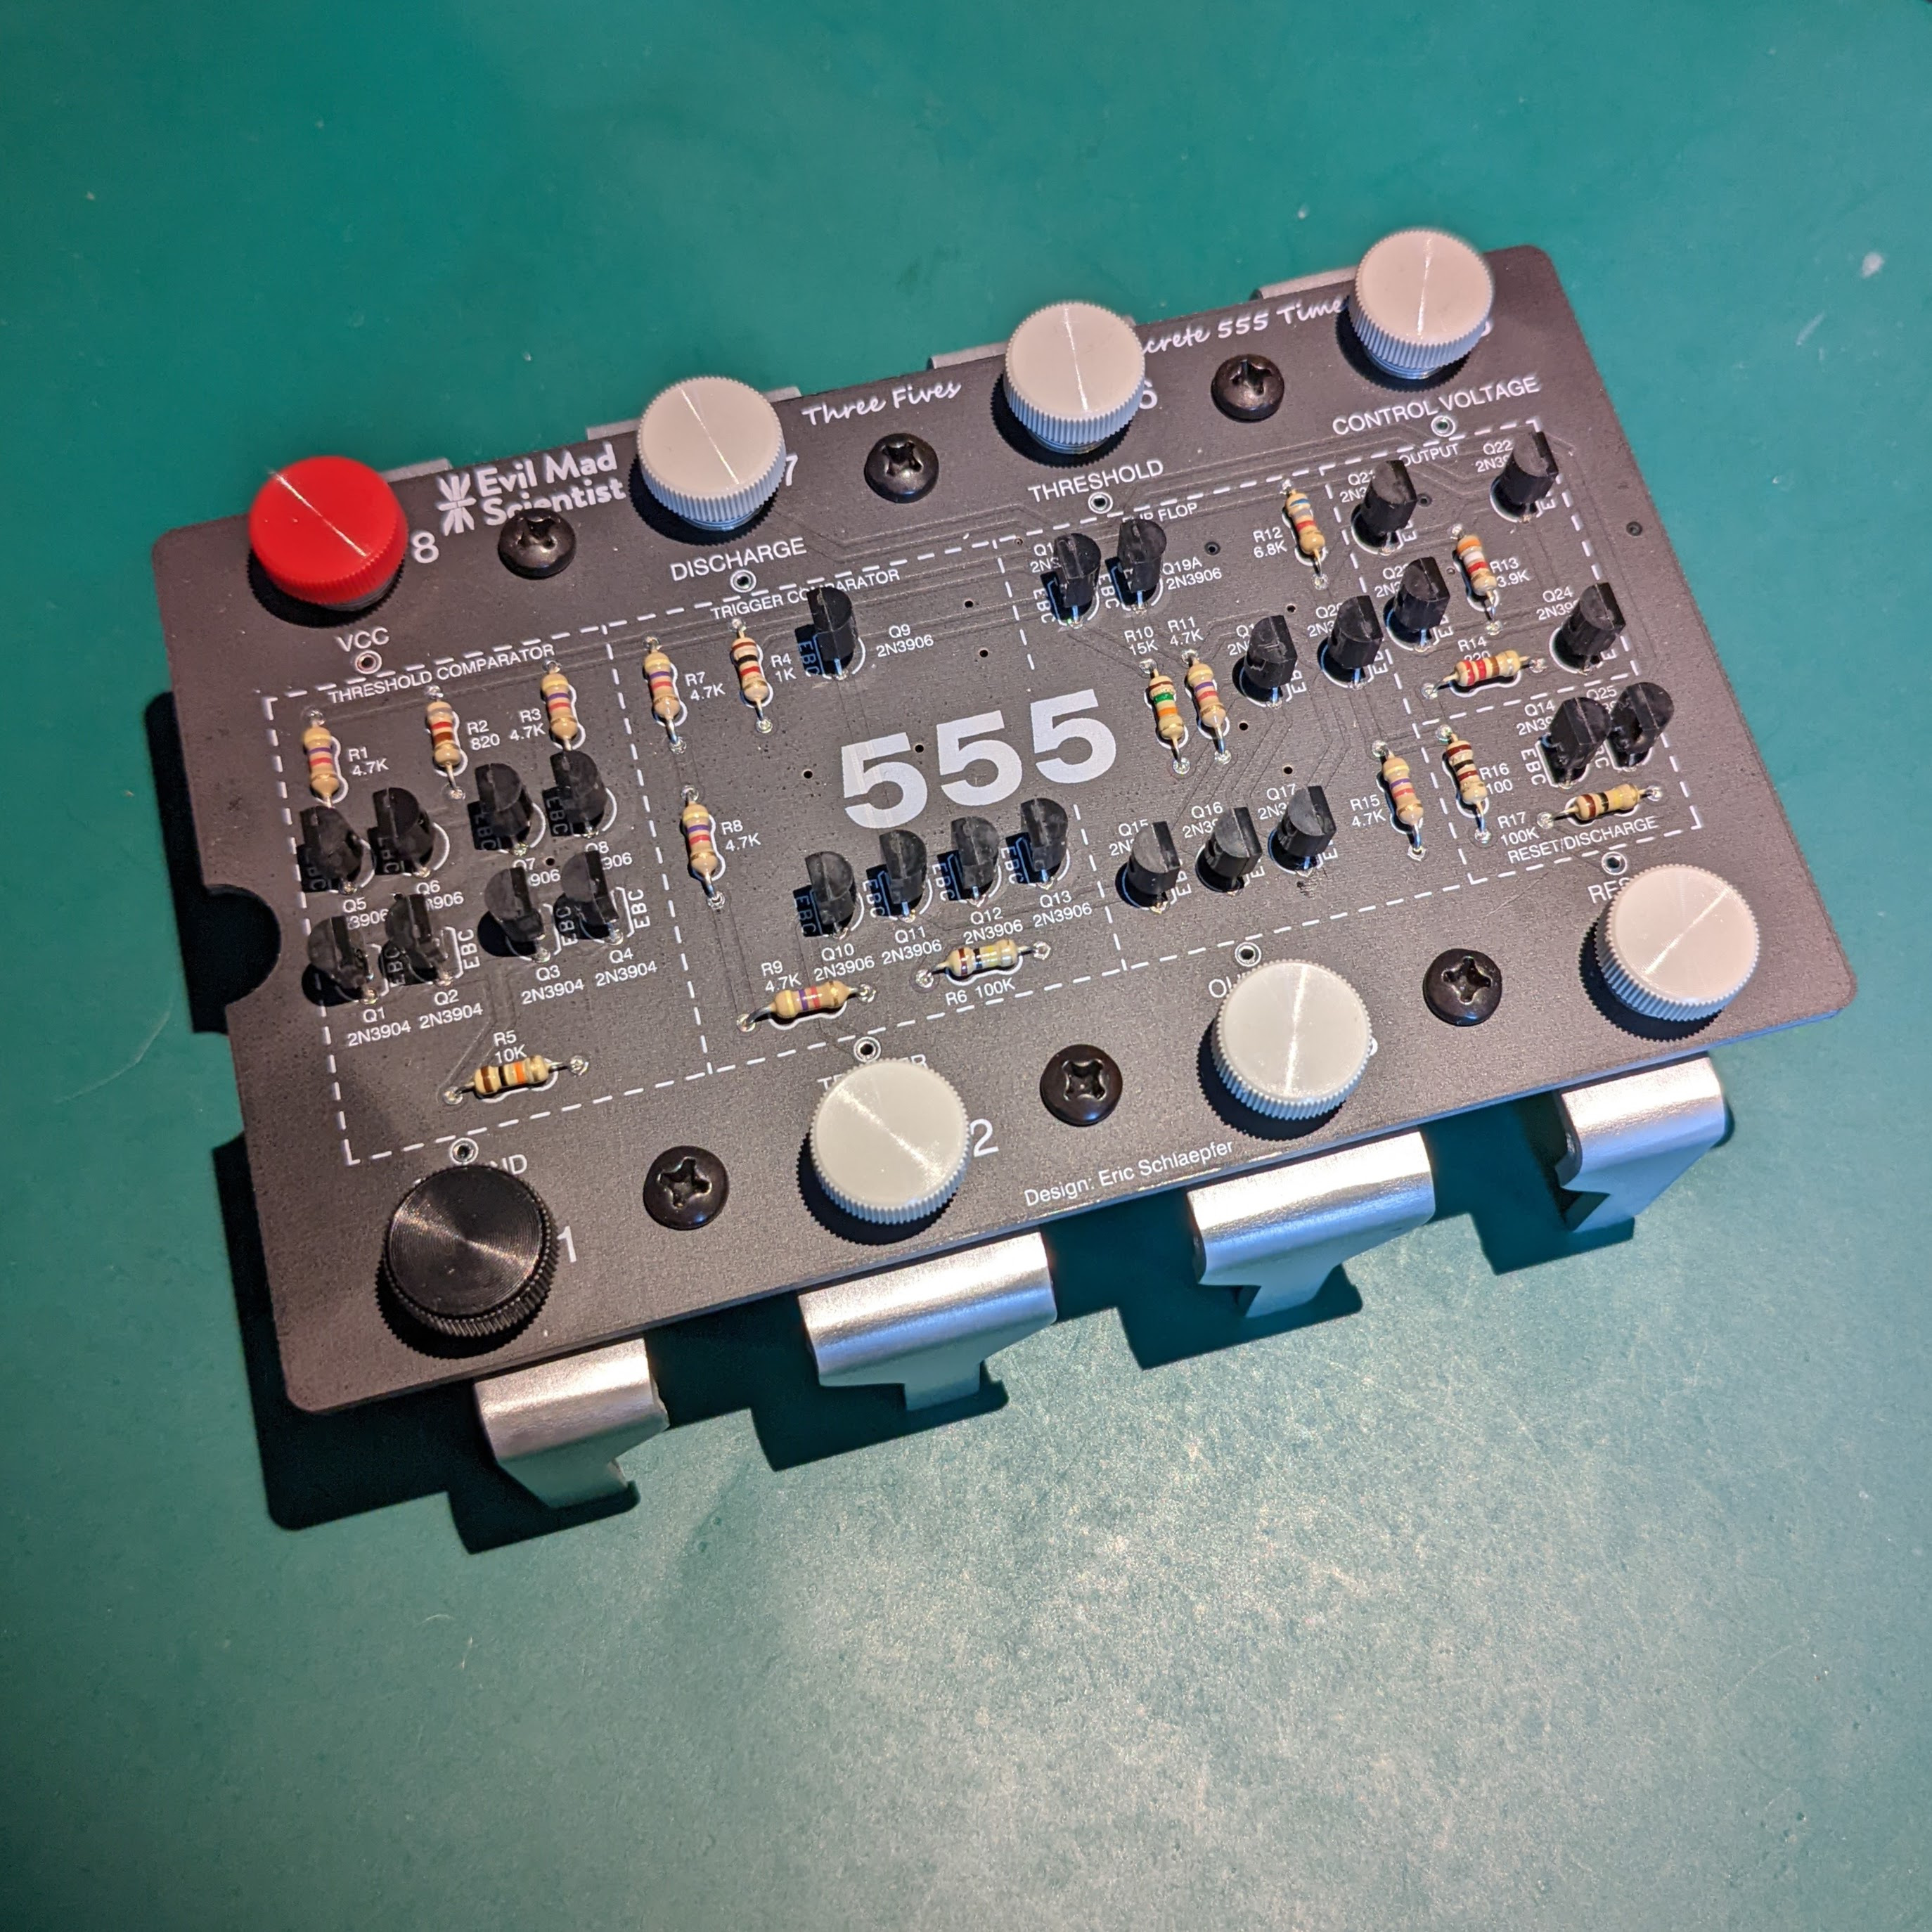 Jumbo 555 built from discrete components